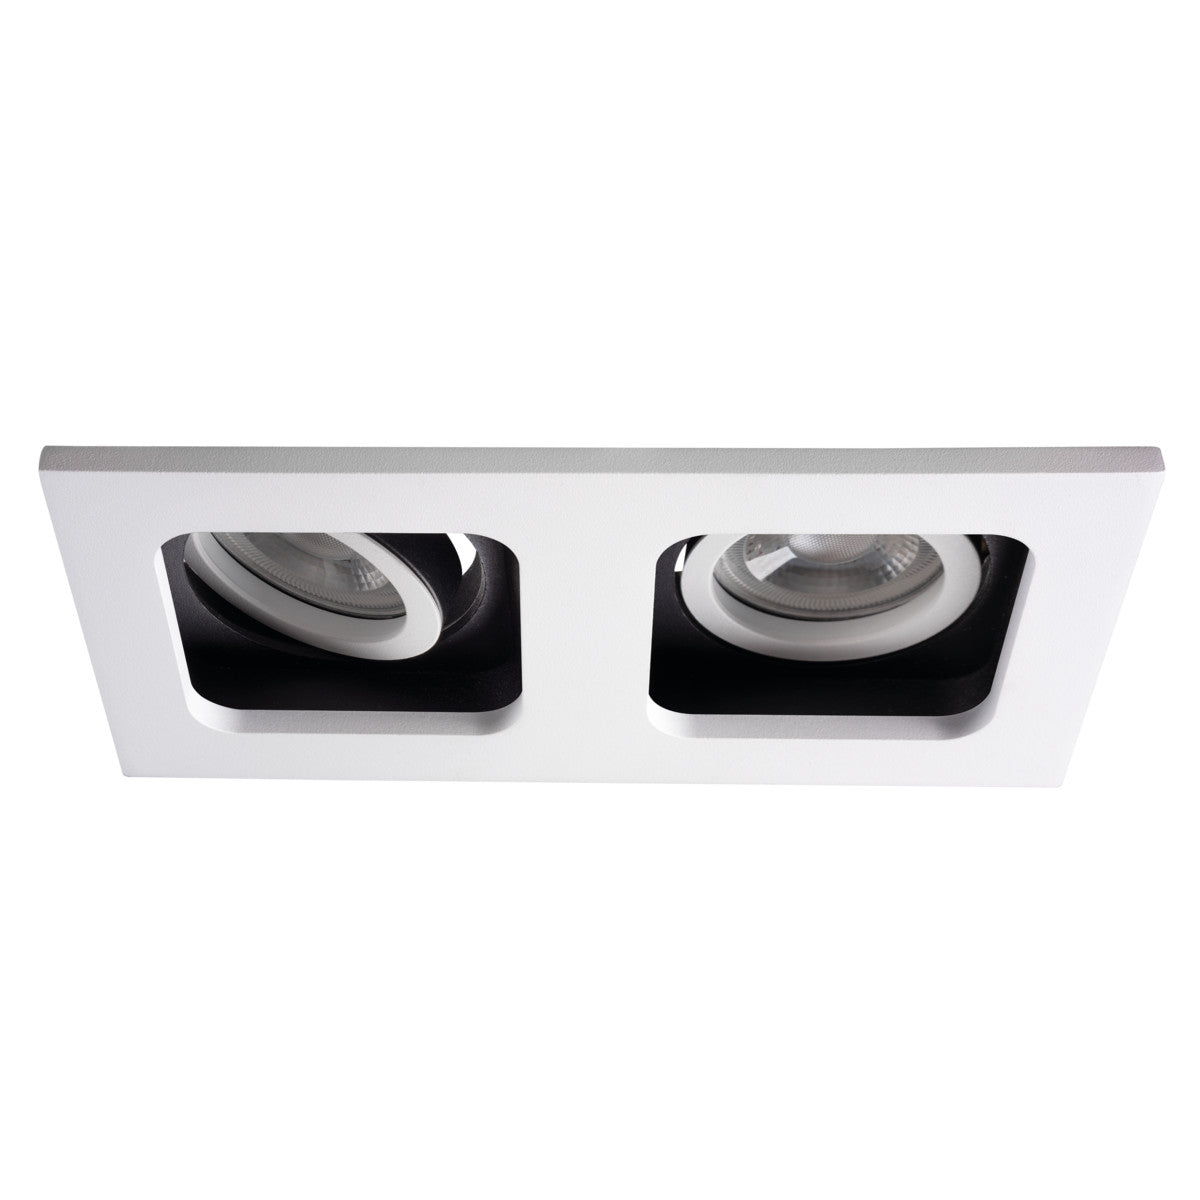 Kanlux REUL Ceiling Recessed Mounted GU10 Square Single Double Spot Light Fitting Lighting